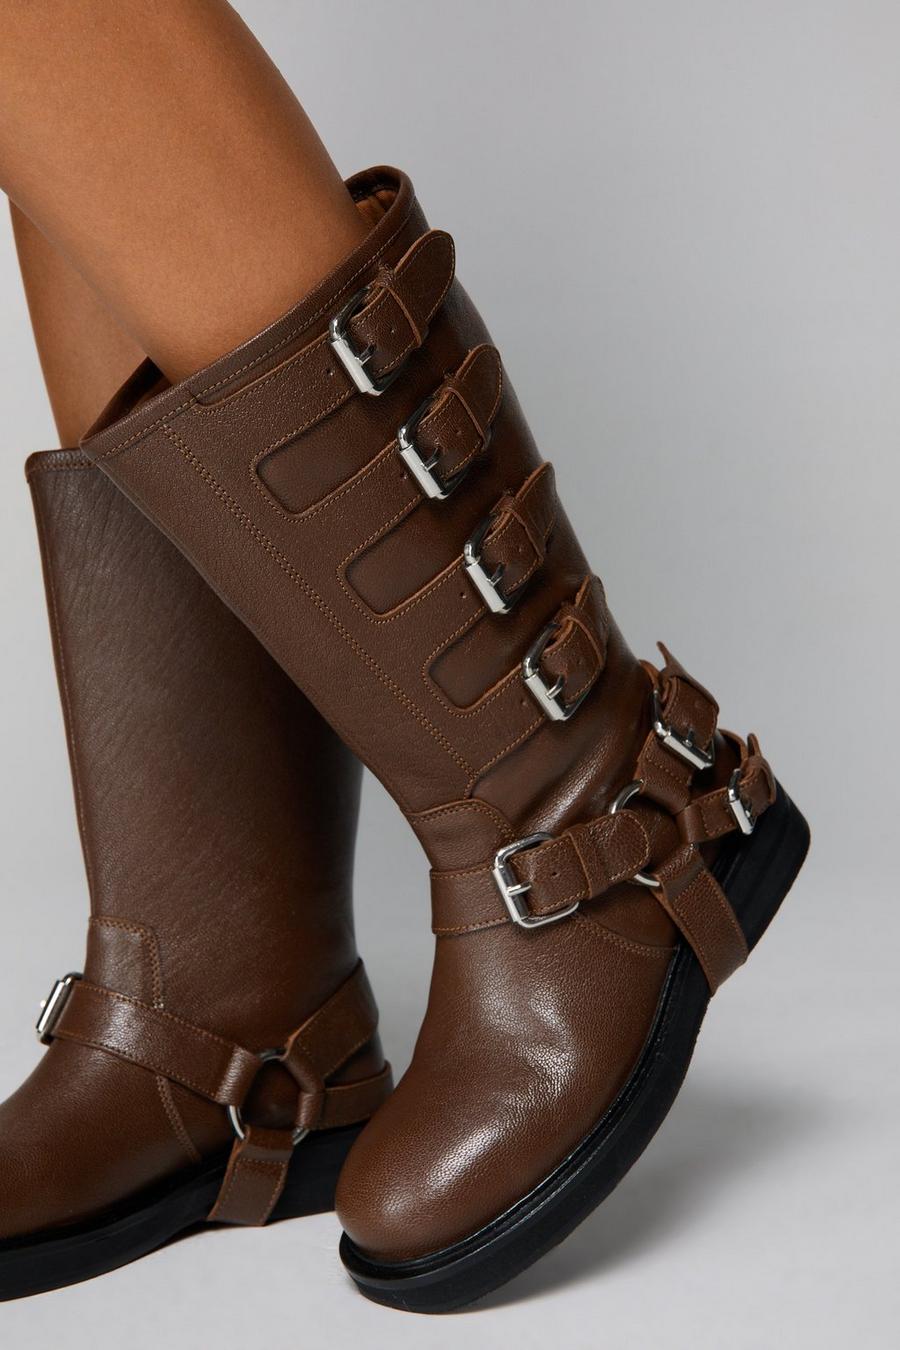 Tan Real Leather Multi Buckle Biker Boots